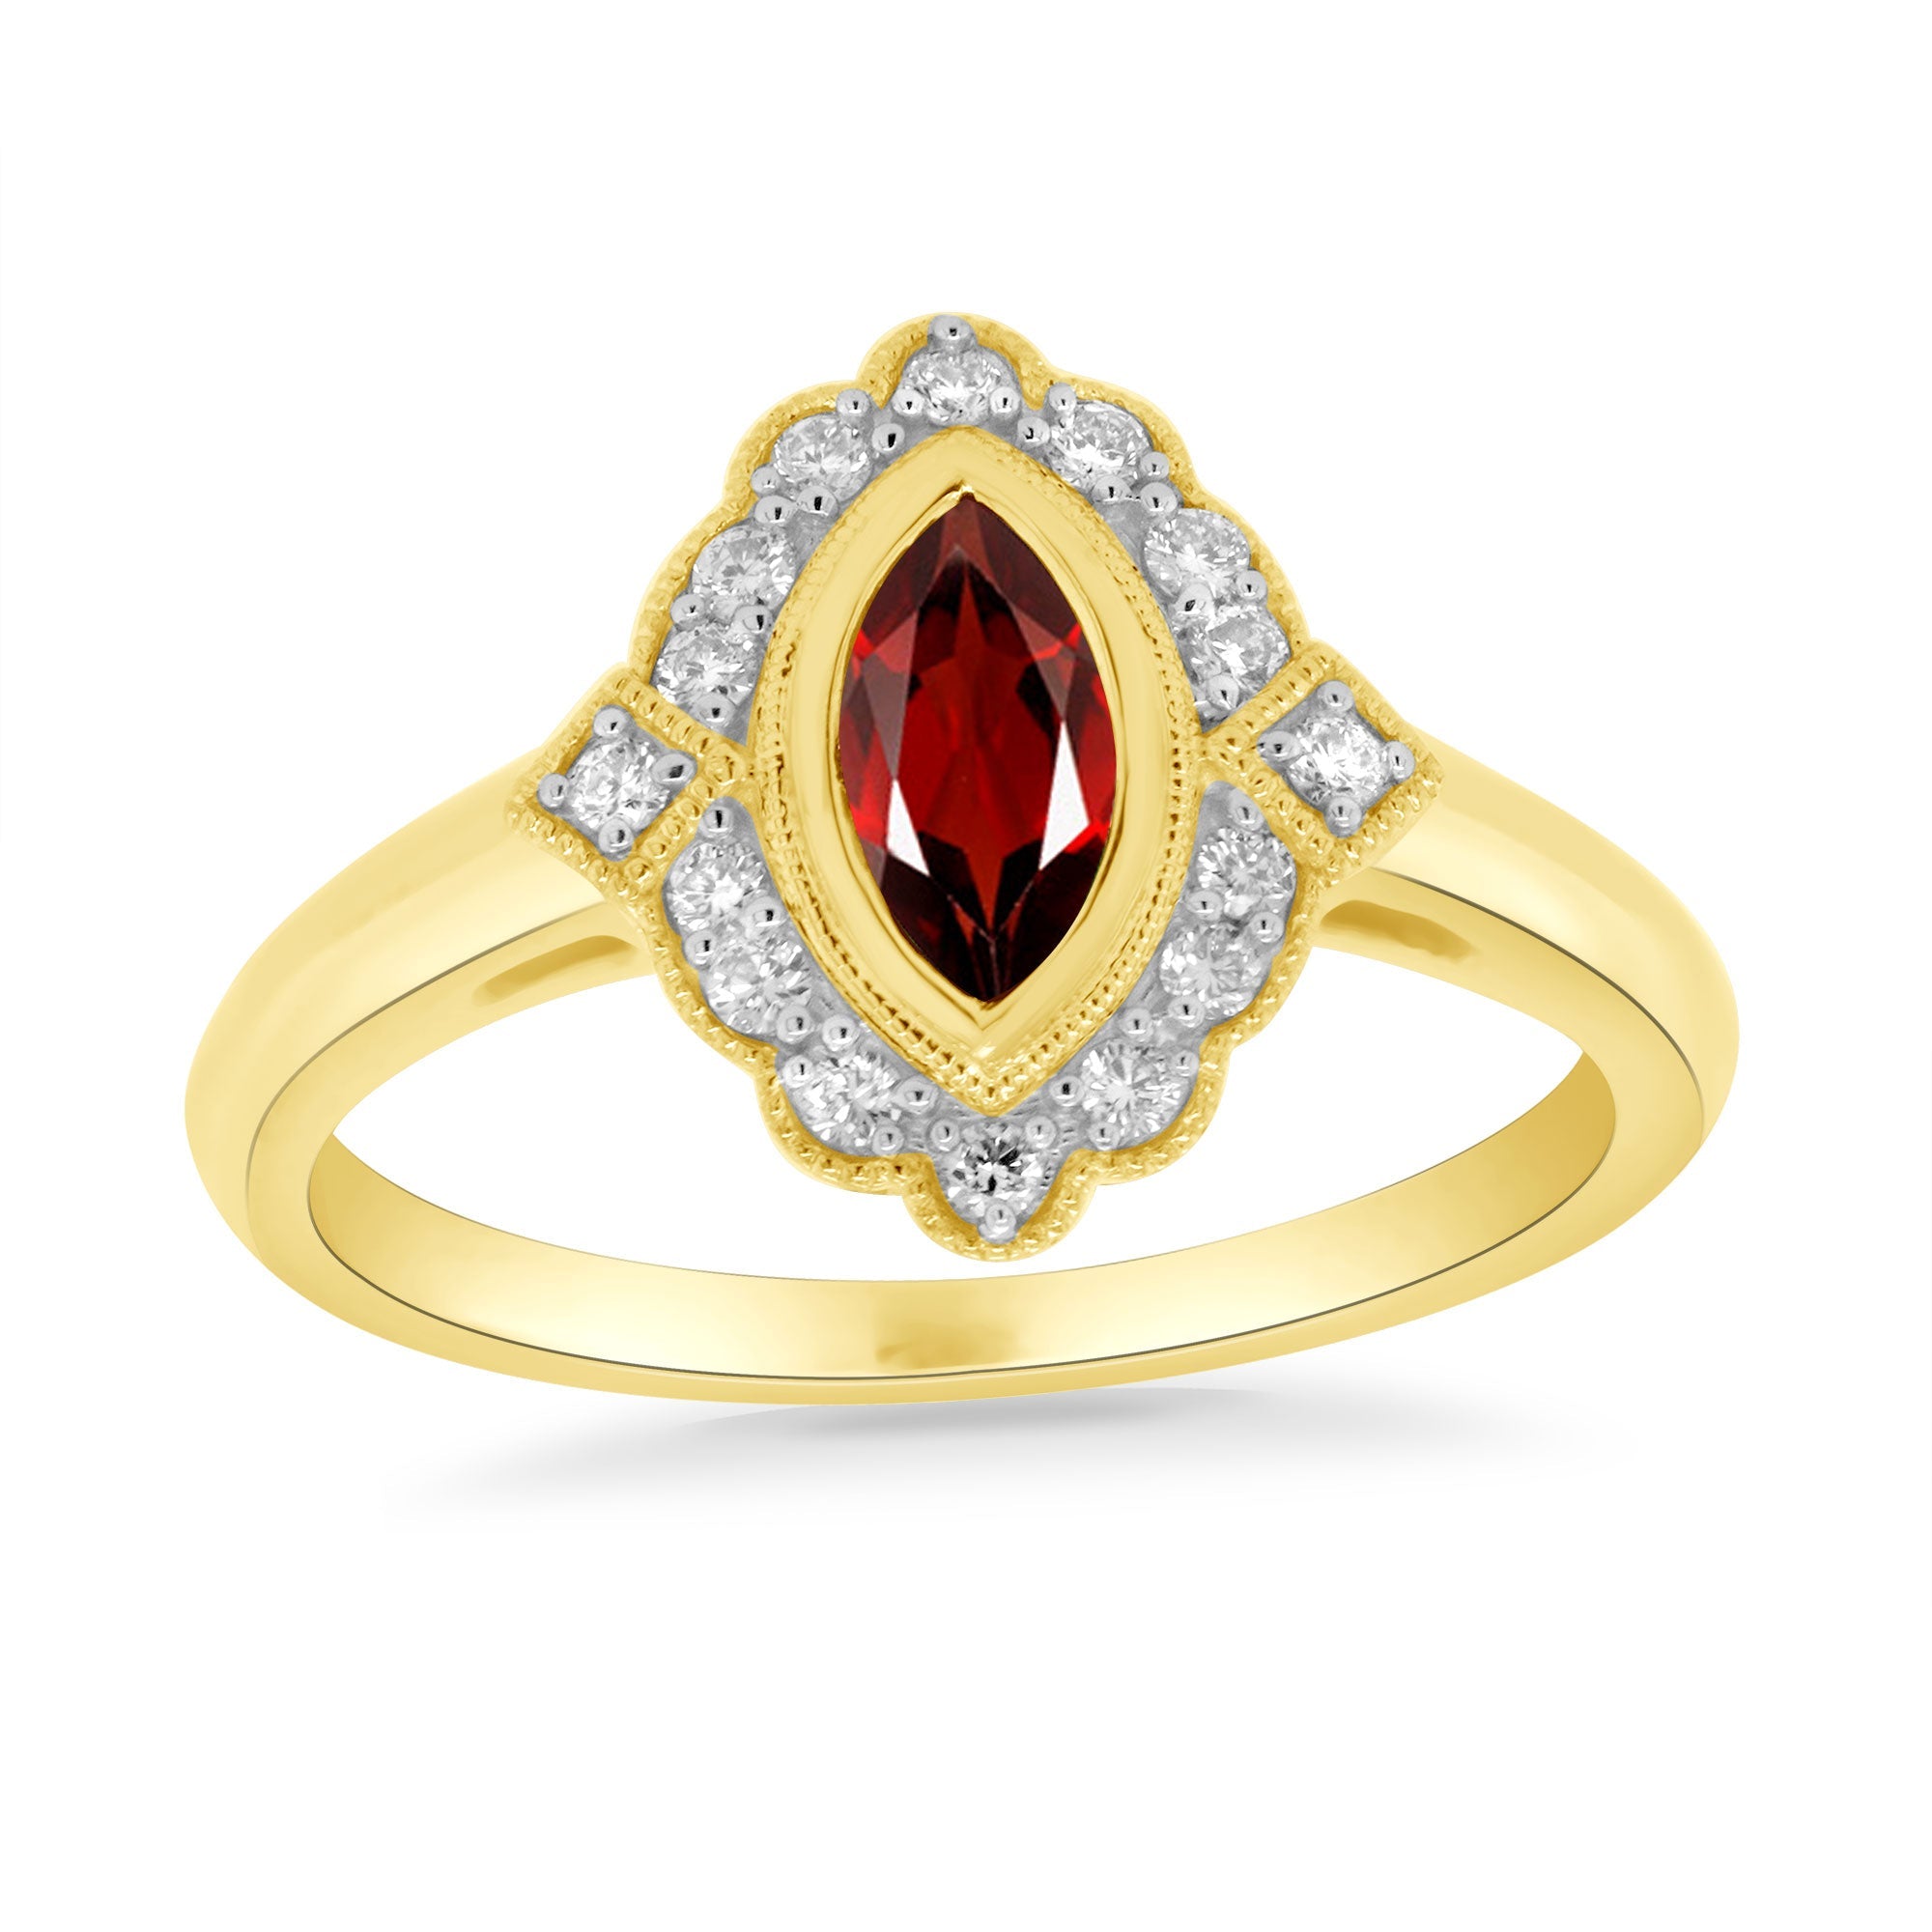 9ct gold 8x4mm marquise shape garnet & antique style diamond cluster ring 0.15ct